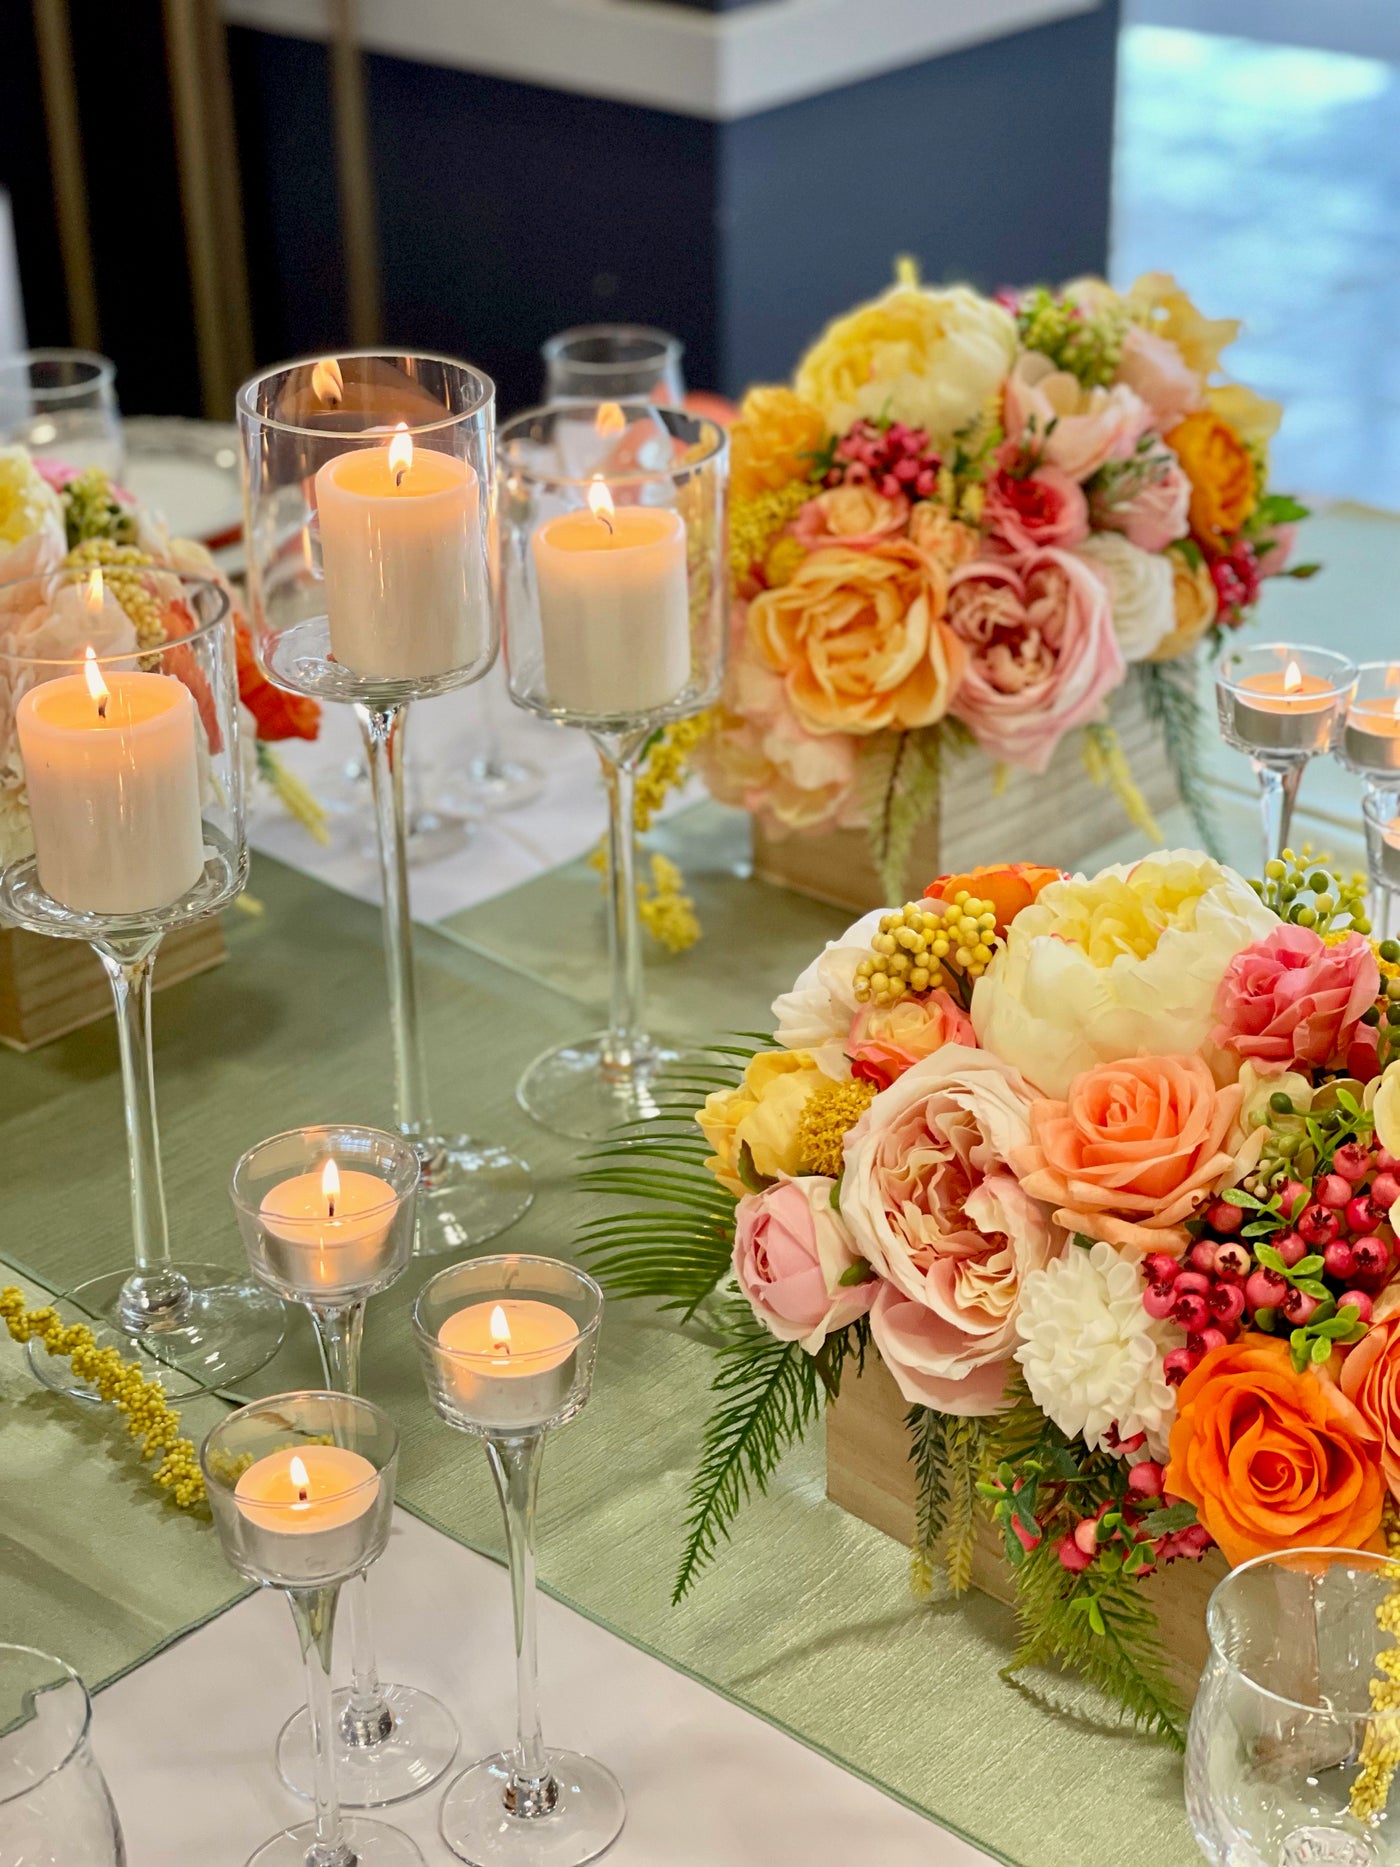 Rent a Rose- Centrepiece- orange, yellow and pink flowers-  Rent for five days for $20.00